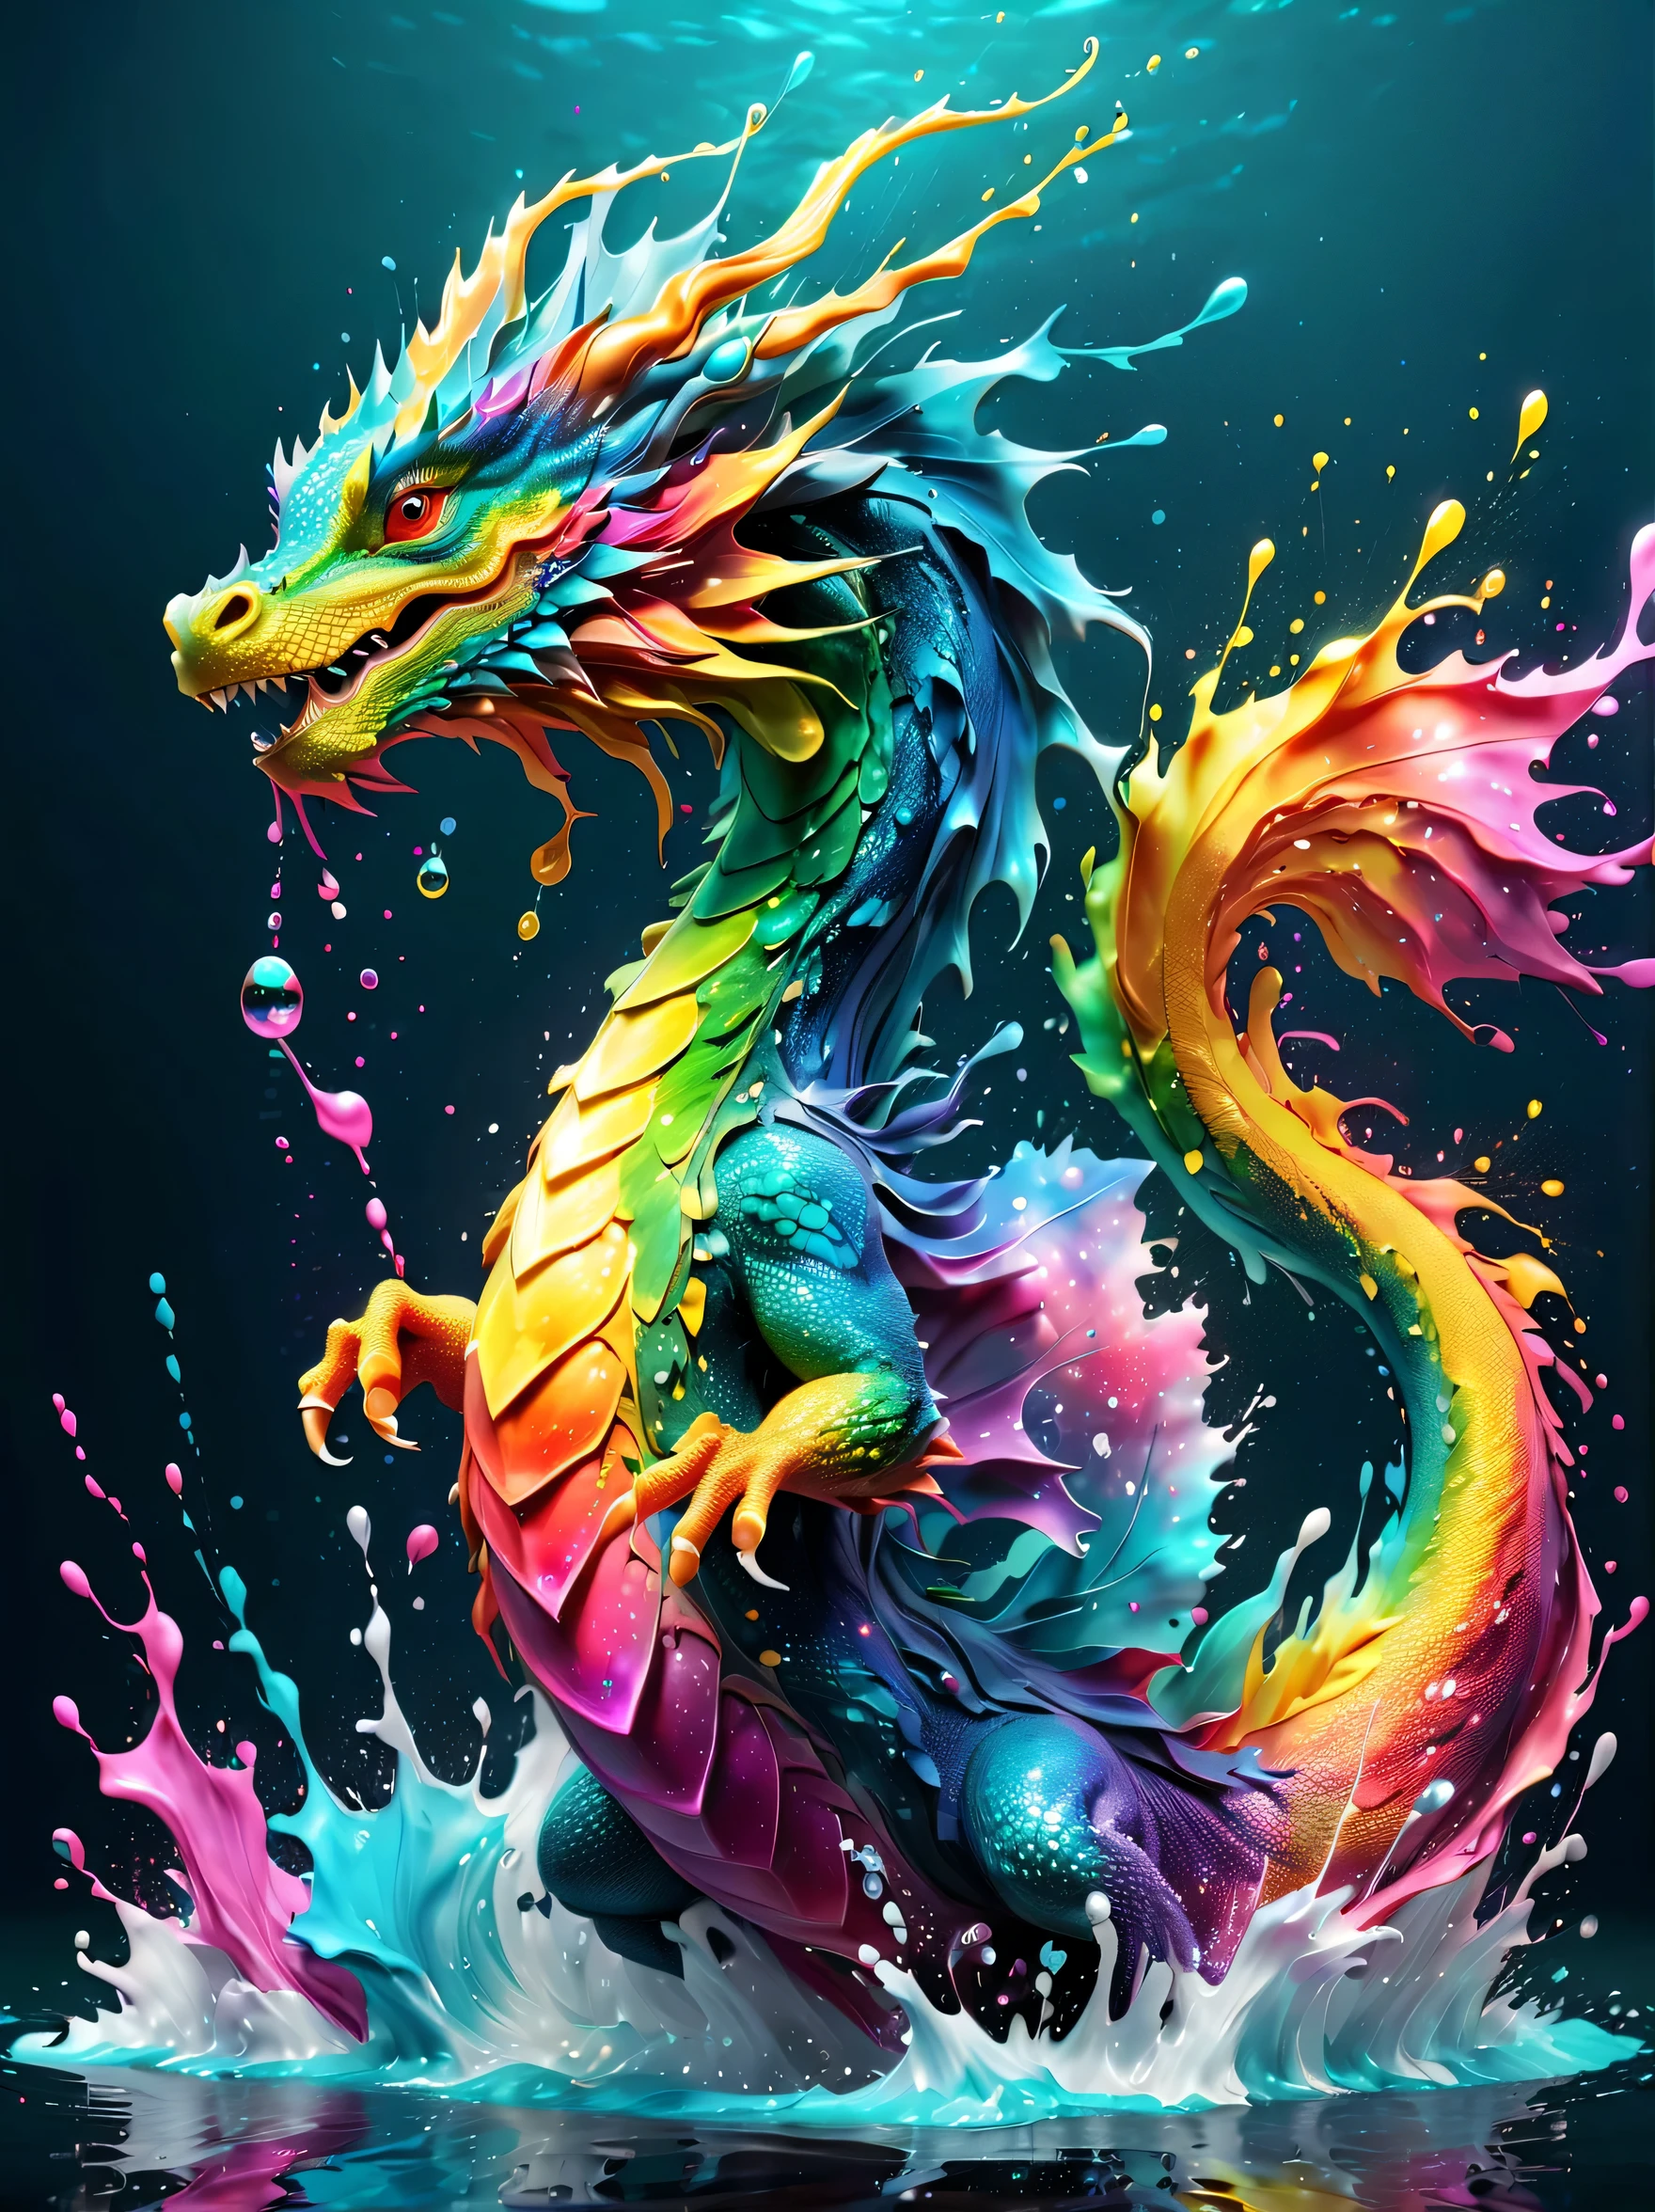 Expressing the flow of ink dancing in the wind,water effects,colorful water,A water dragon is swimming in the ink,dragon&#39;The body is smooth and streamlined.,Ink splash,Sparkling,Bright colors,light reflection,rich colors,abstract,3D,8K,High resolution,masterpiece,high quality,Detailed details,Colors of the rainbow,laugh mischievously,tricky,design,fun,bright colors,splash of water,invite you to the world of art,wonderful,dim background